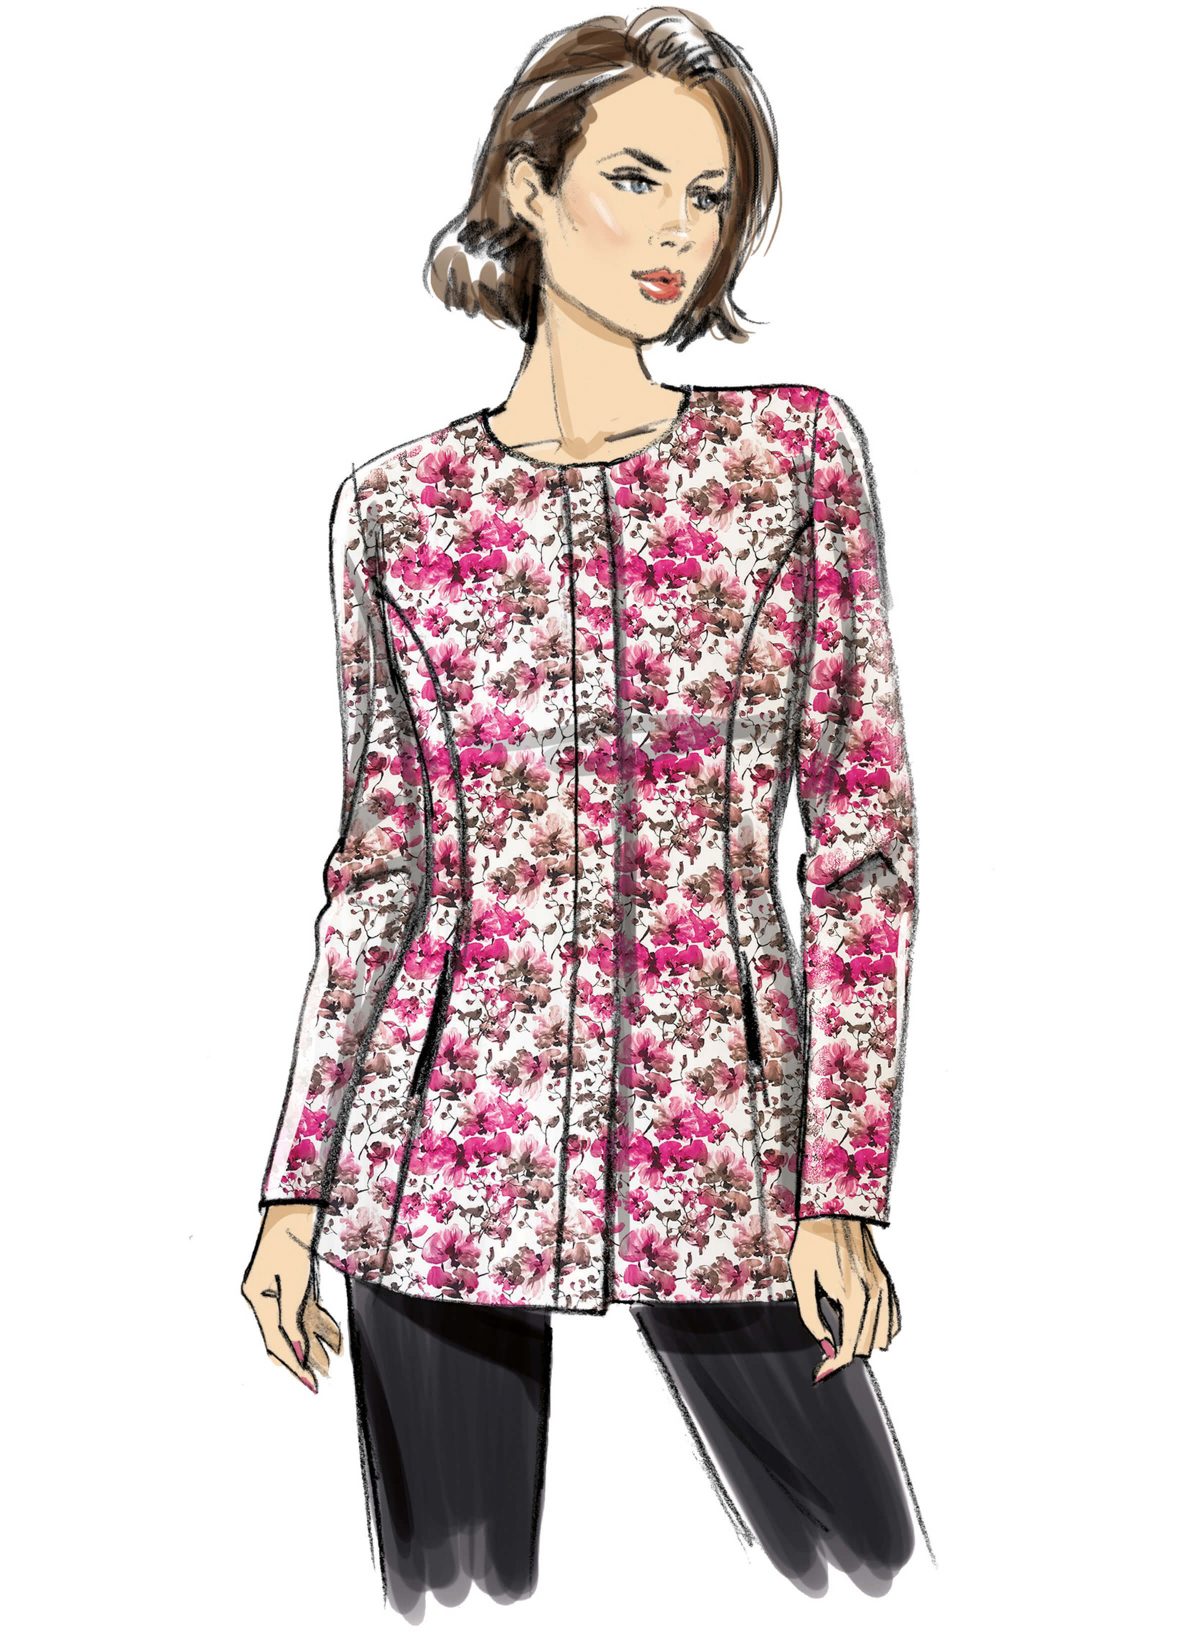 Butterick Sewing Pattern B6979 Misses’ Jacket